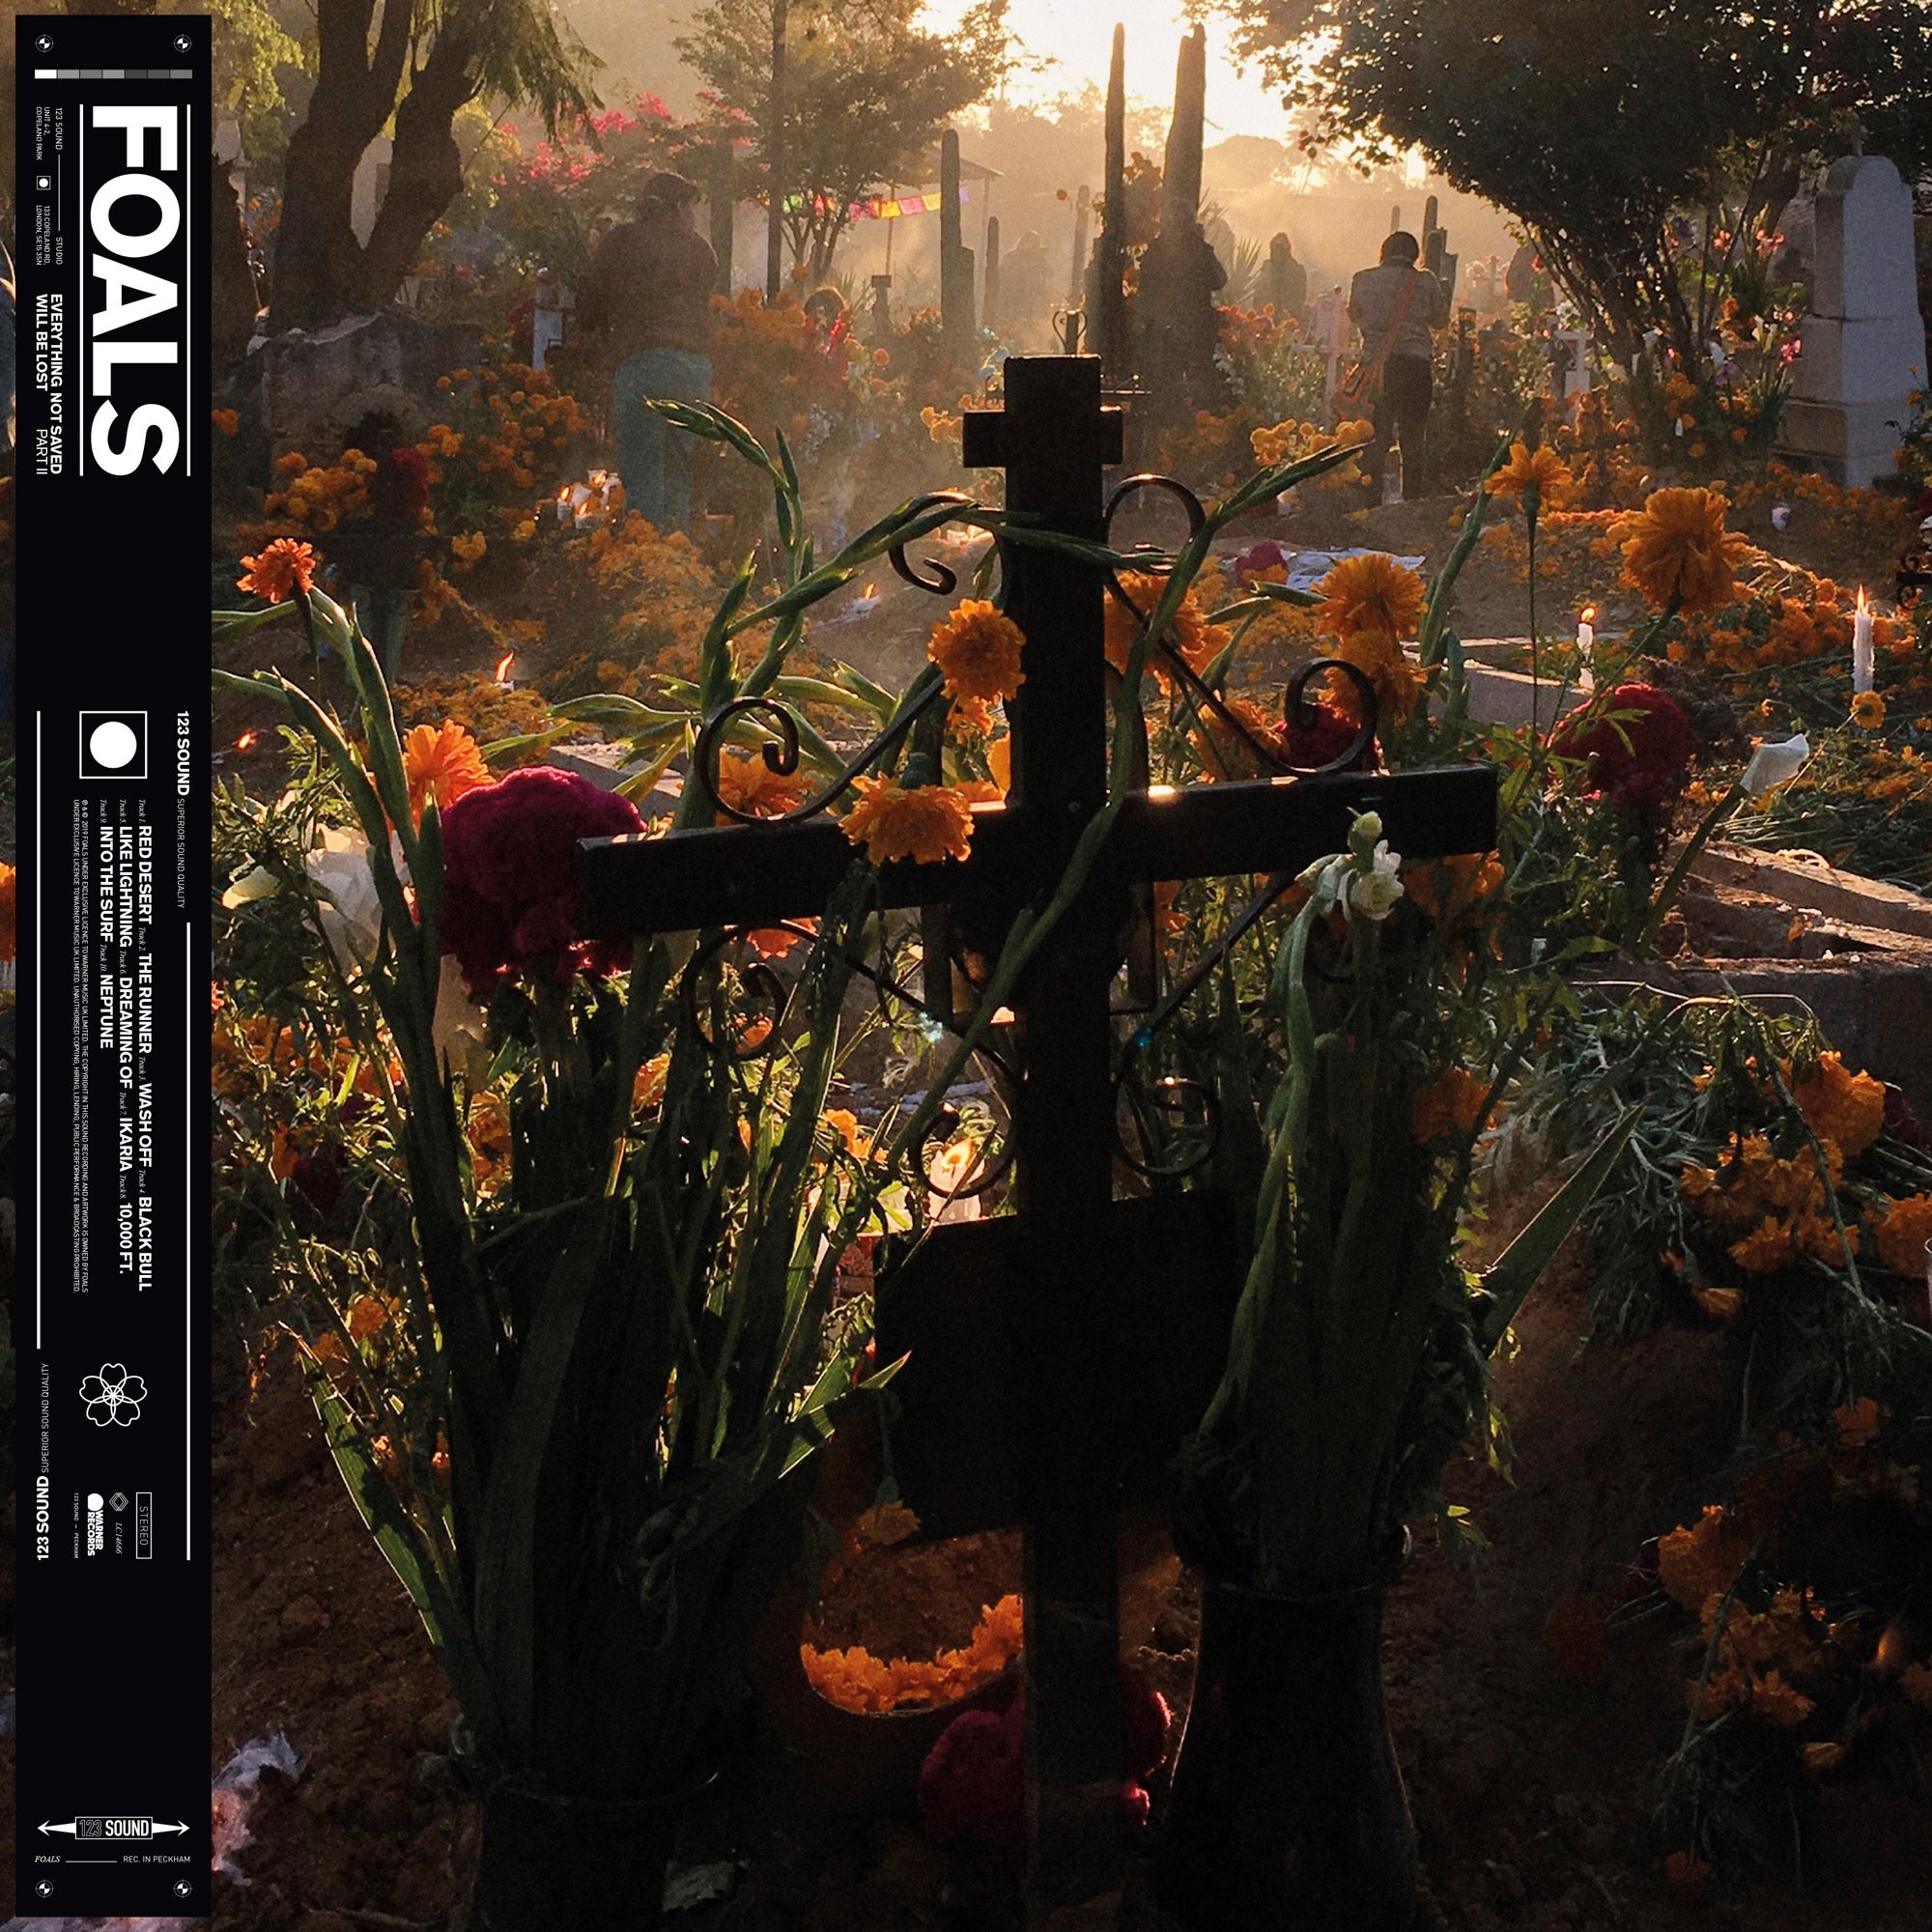 Foals-Everything Not Saved Will Be Lost Part II-16BIT-WEB-FLAC-2019-ENRiCH